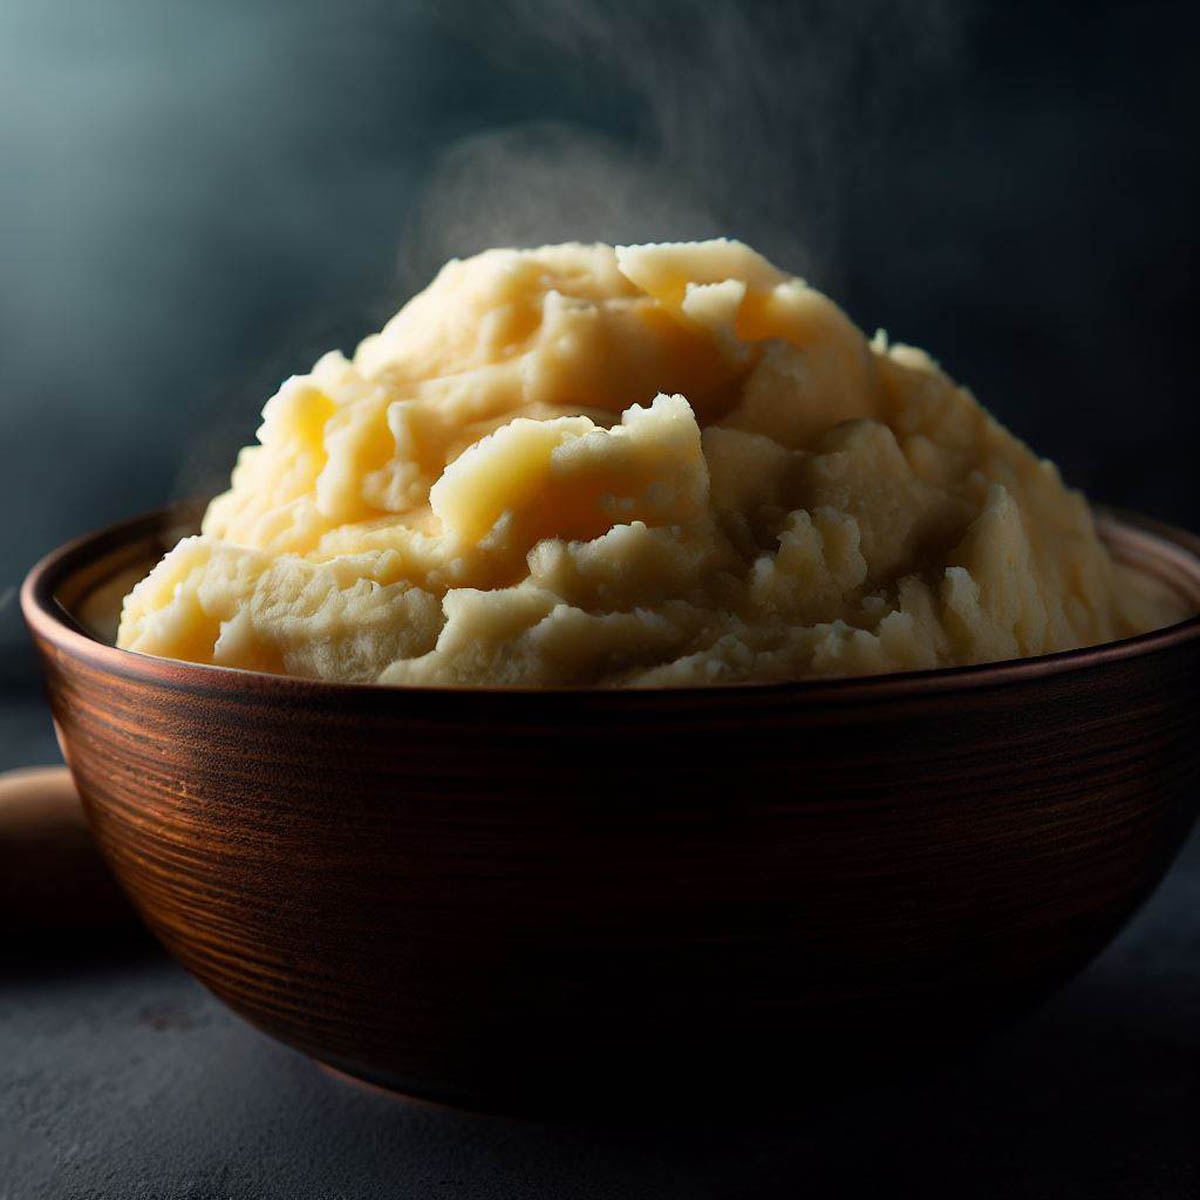 A bowl of freshly made, creamy mashed potatoes.